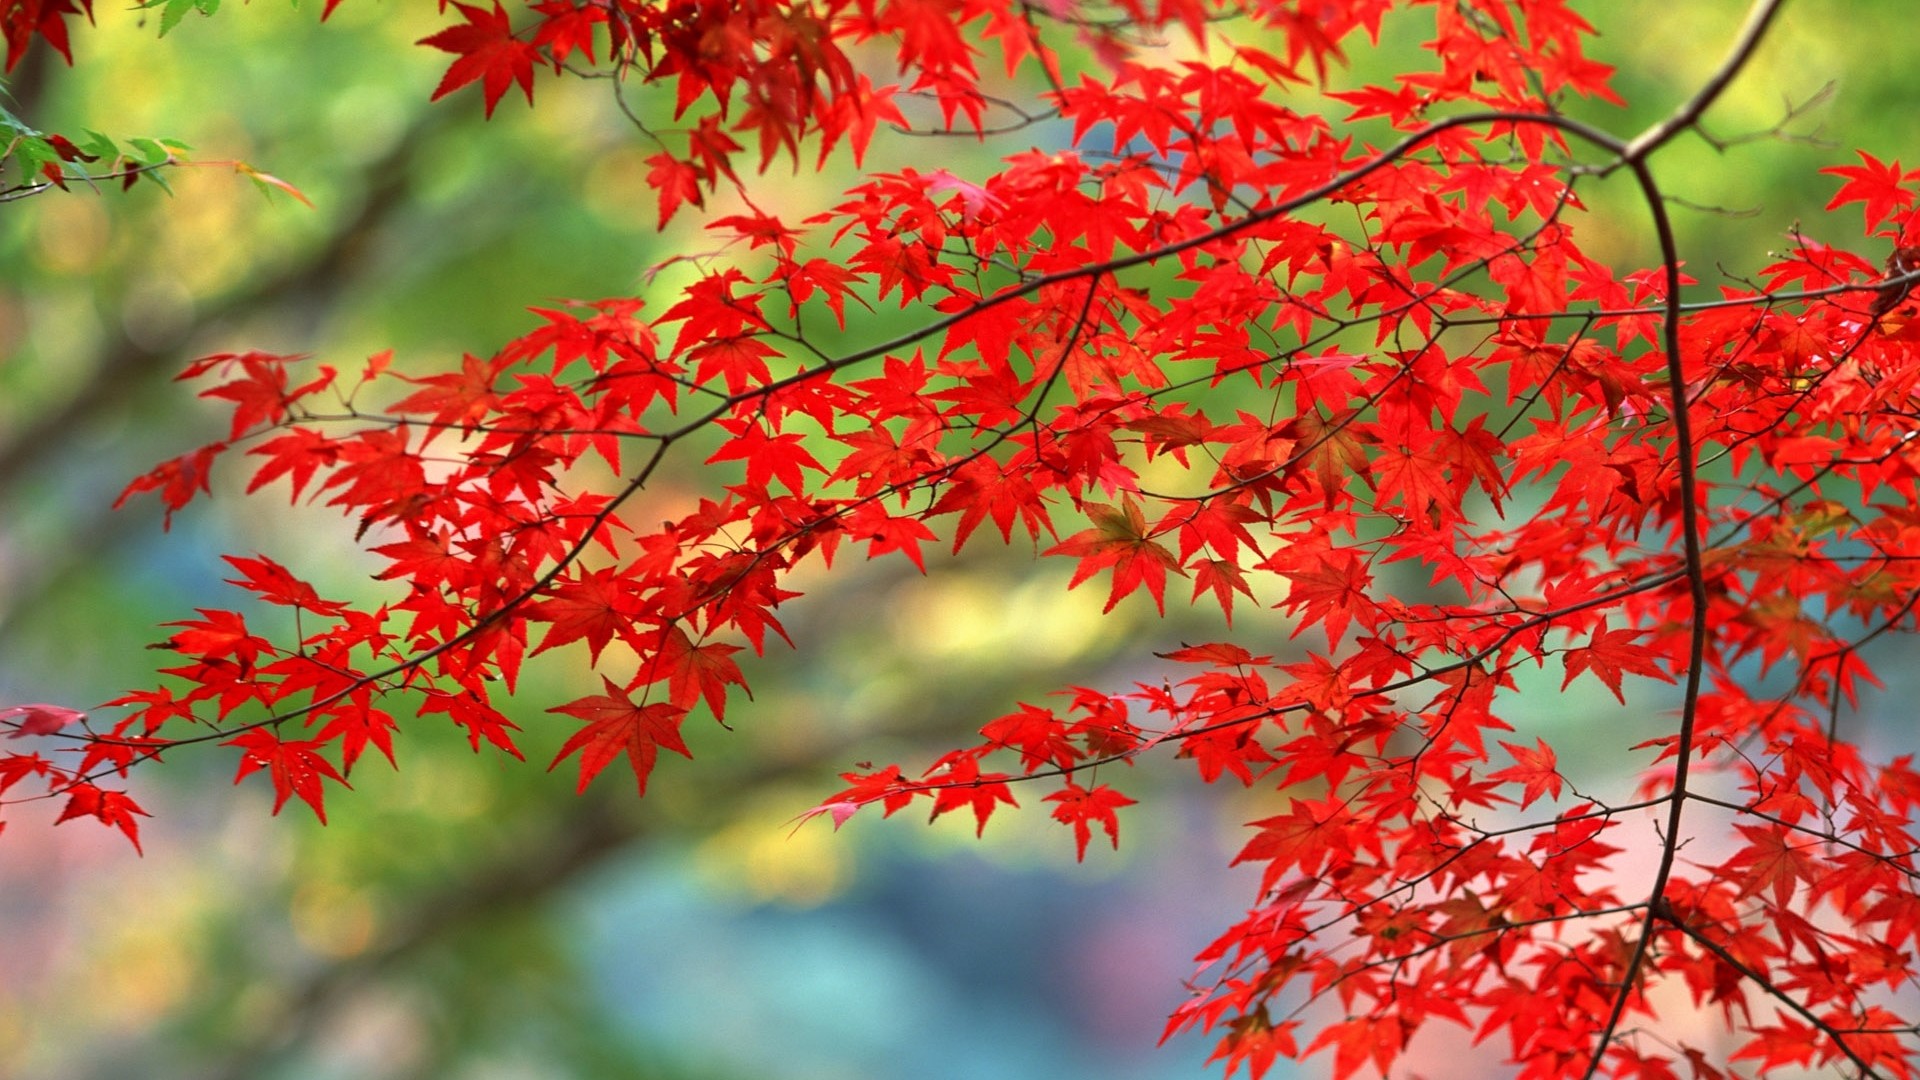 1920x1080 ... New Hd Wallpaper 1080p Nature 13 Preview Leaves Autumn Nature Branches   ...